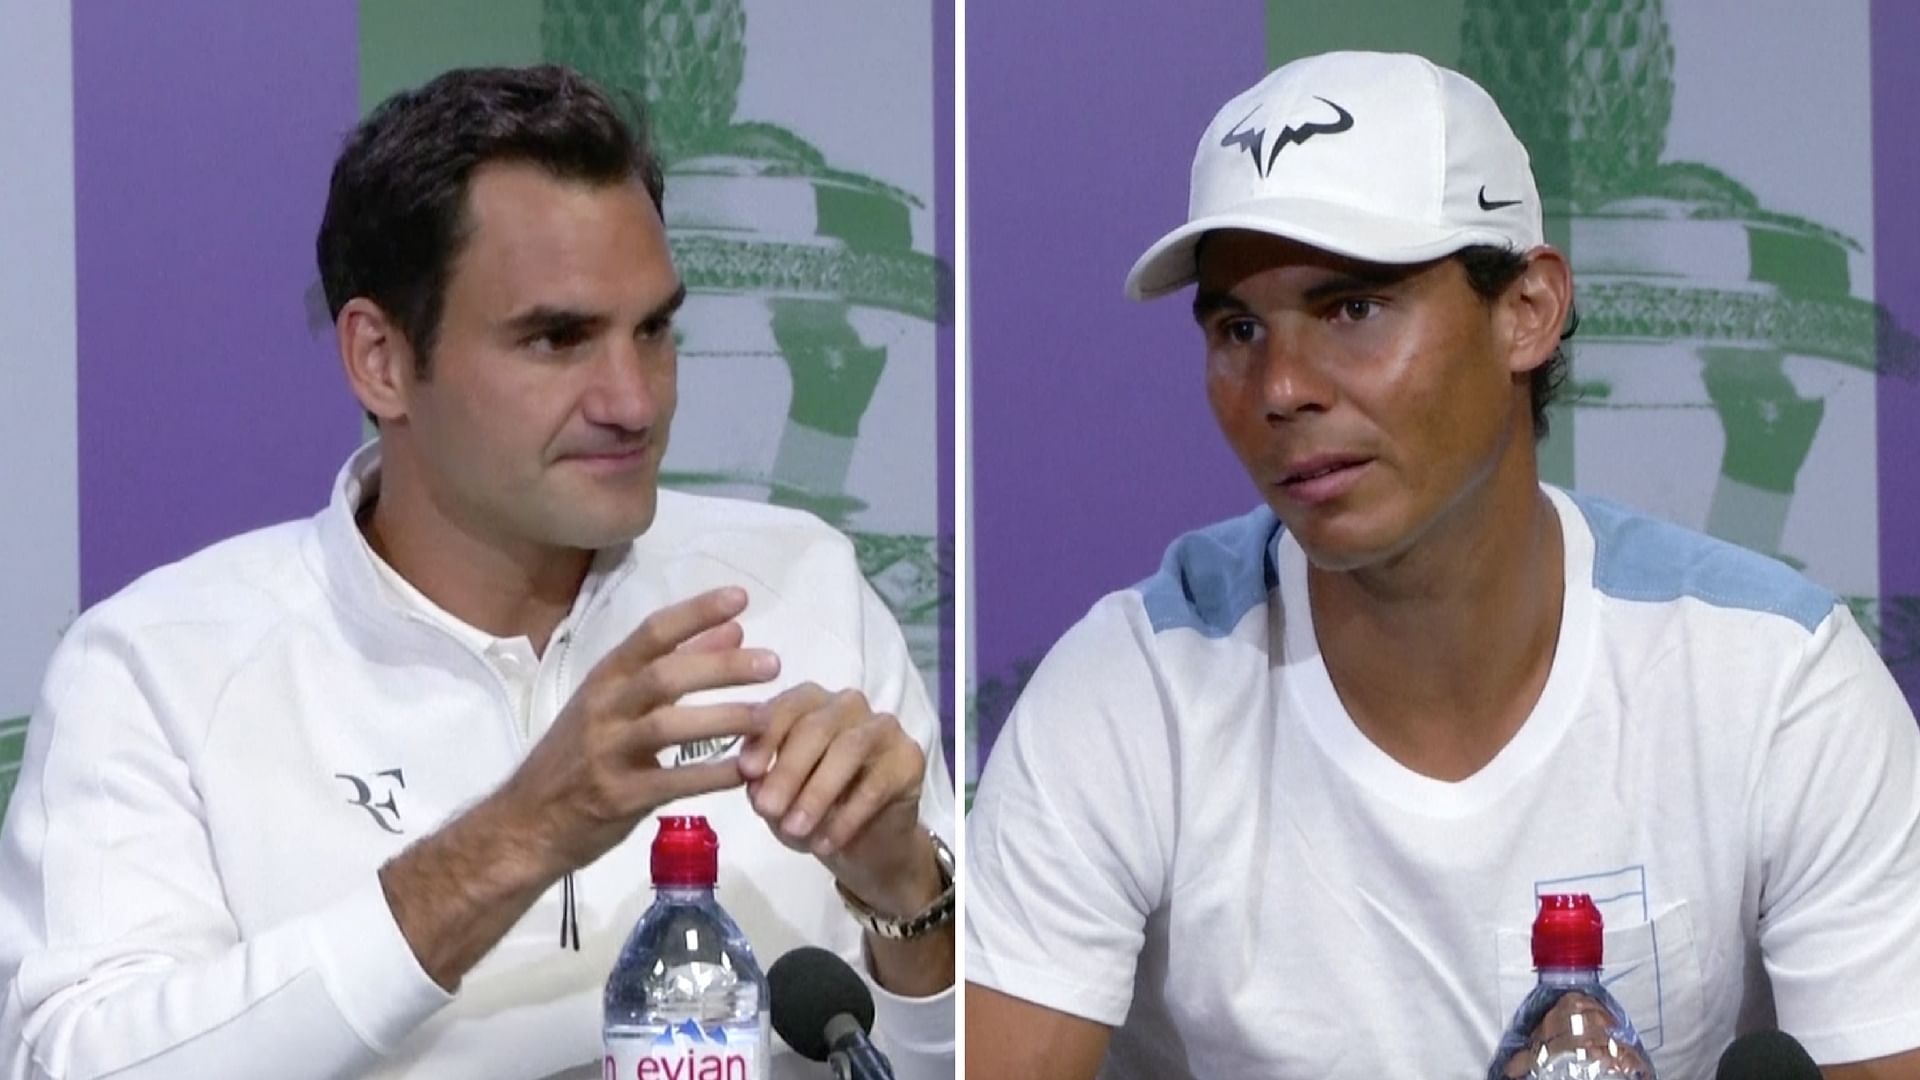 Roger Federer and Rafael Nadal at the press conference before Wimbledon.